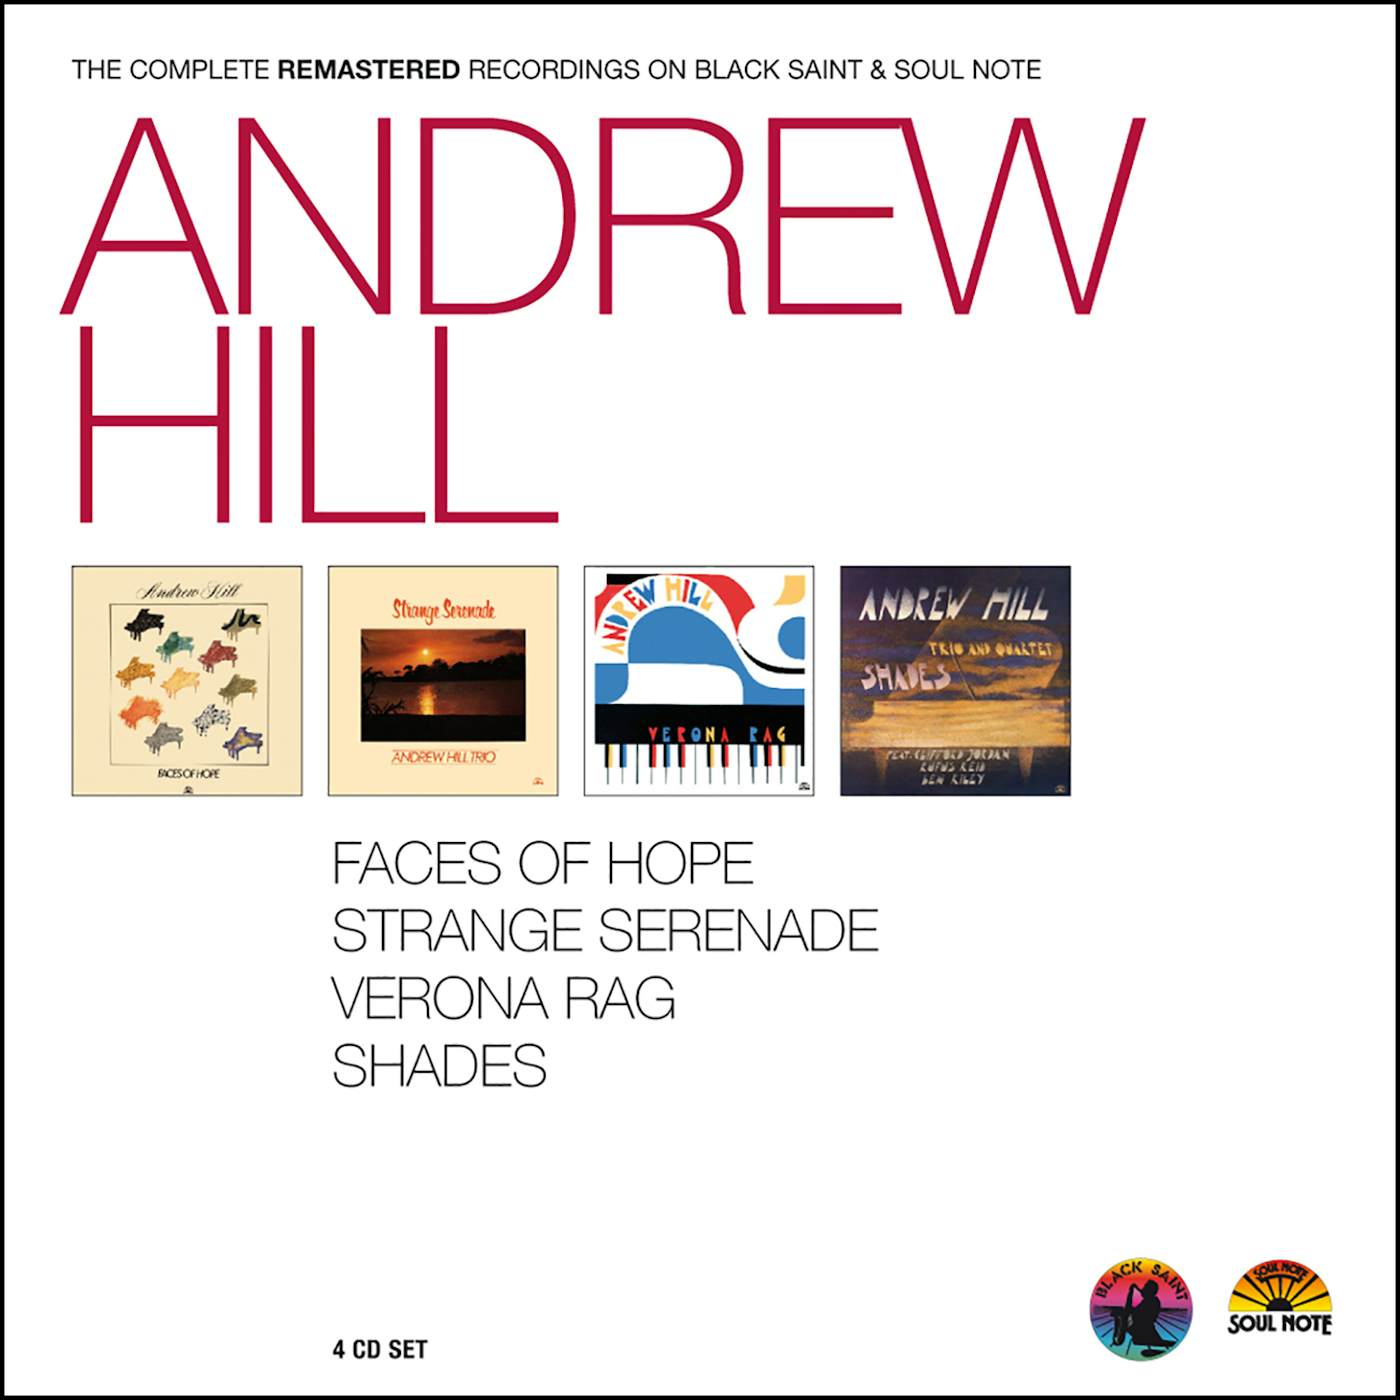 ANDREW HILL - THE COMPLETE REMASTERED RECORDINGS CD